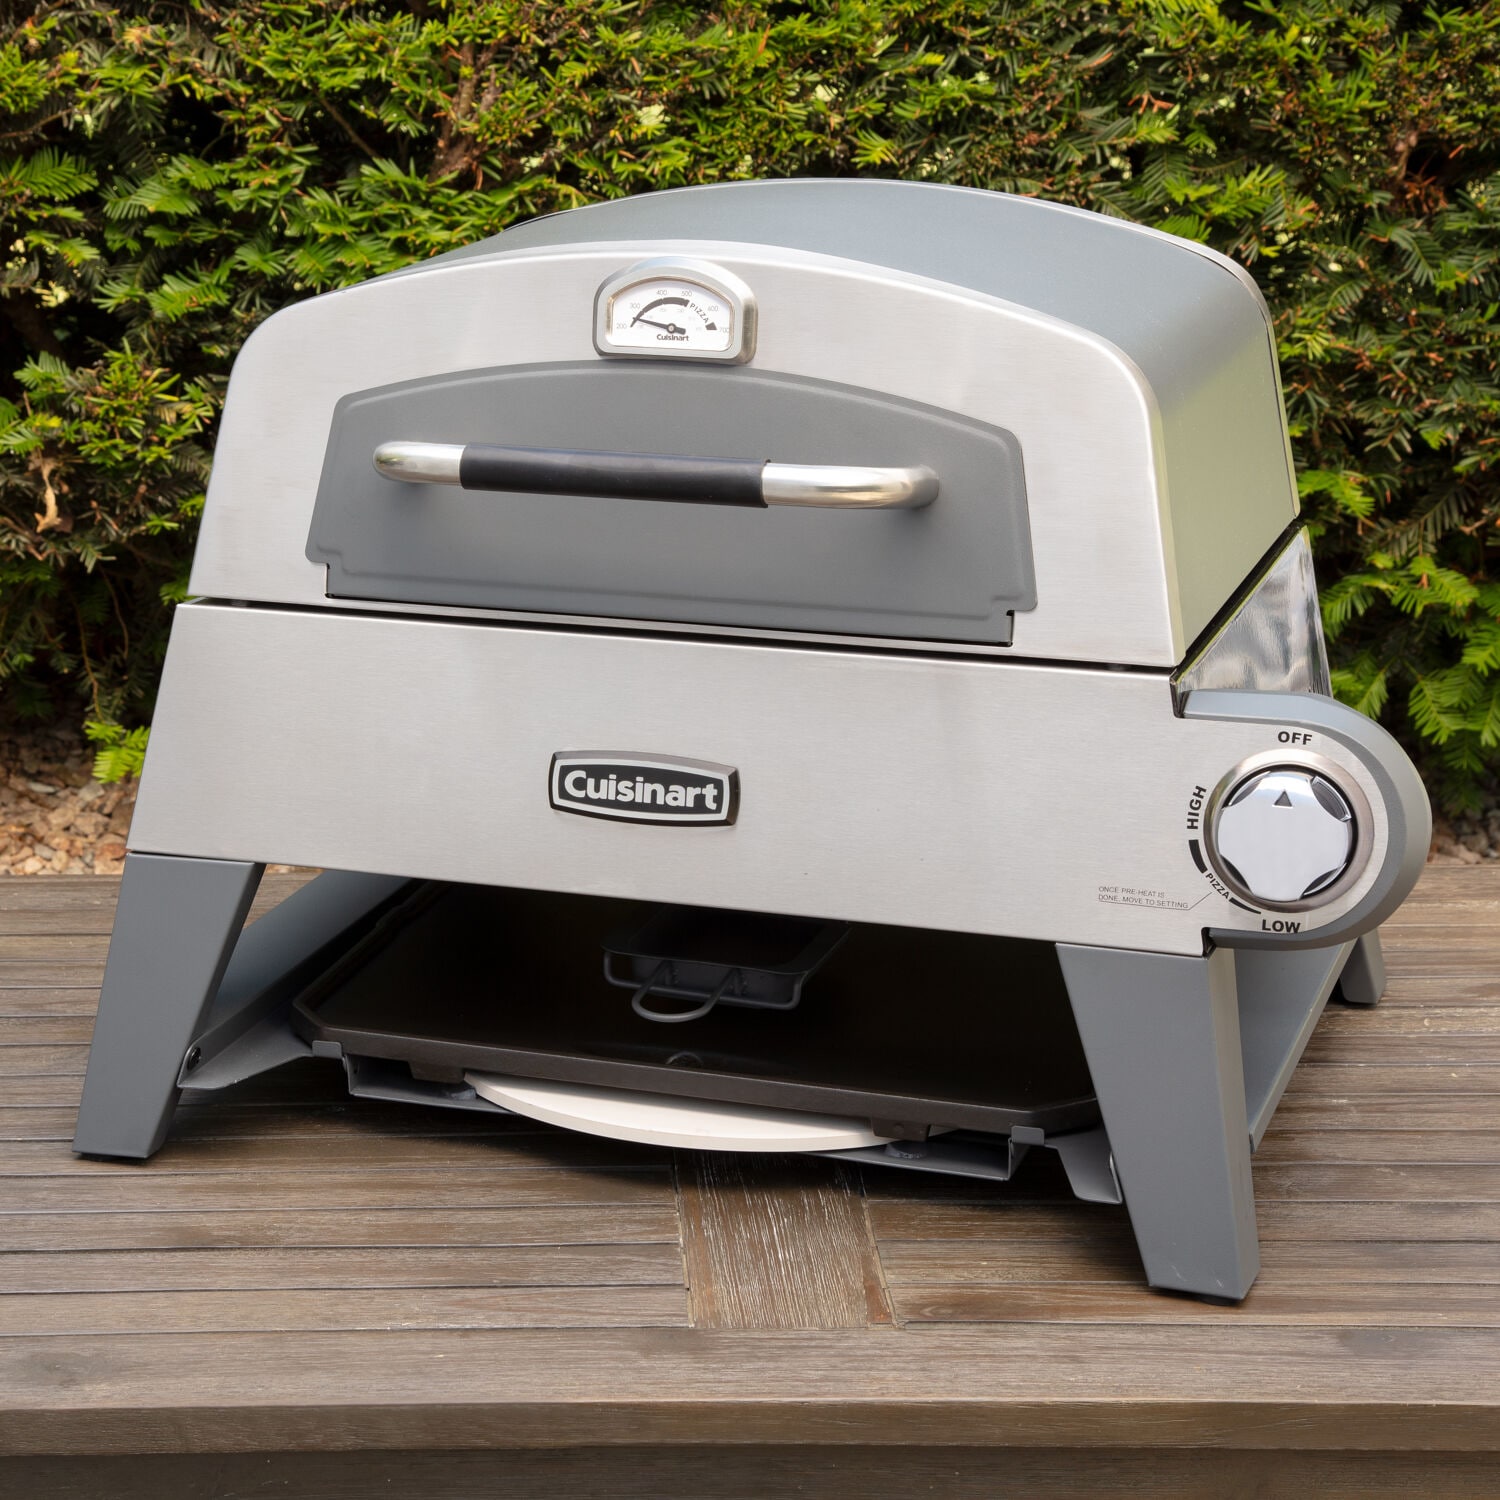 Cuisinart 3-in-1 Pizza Oven Plus, $197.00 Grill and Griddle